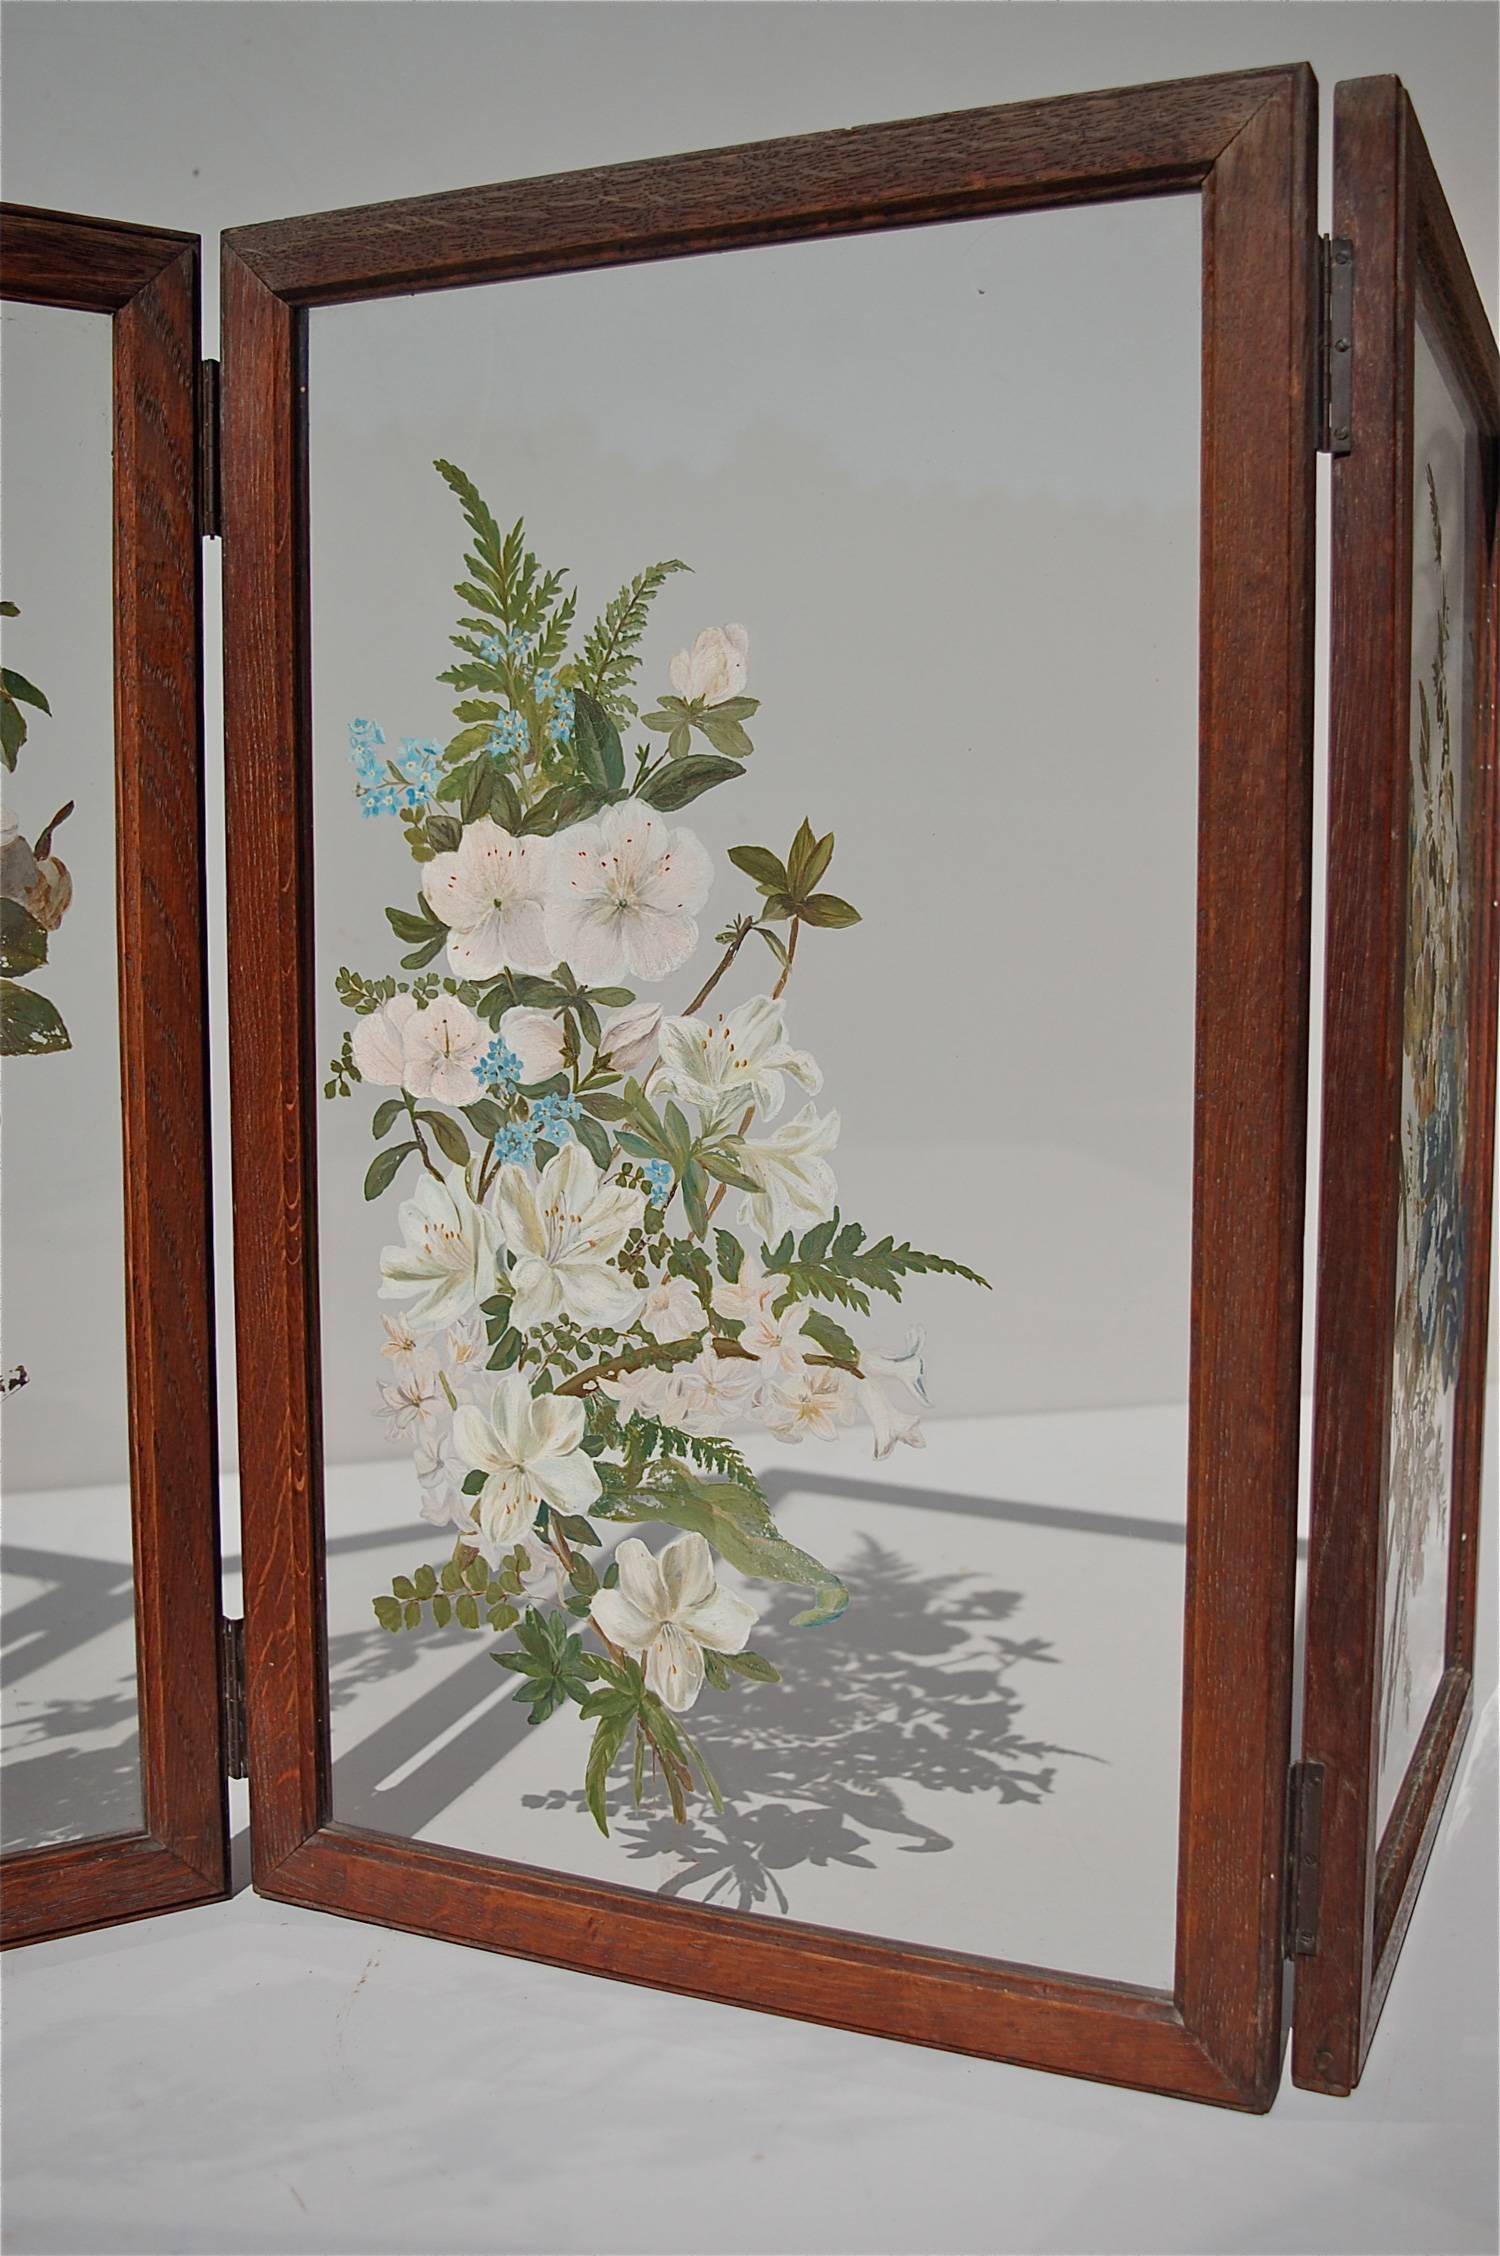 Belgian Hand-Painted Folding Glass Table Screen or Divider, 1940s Belgium